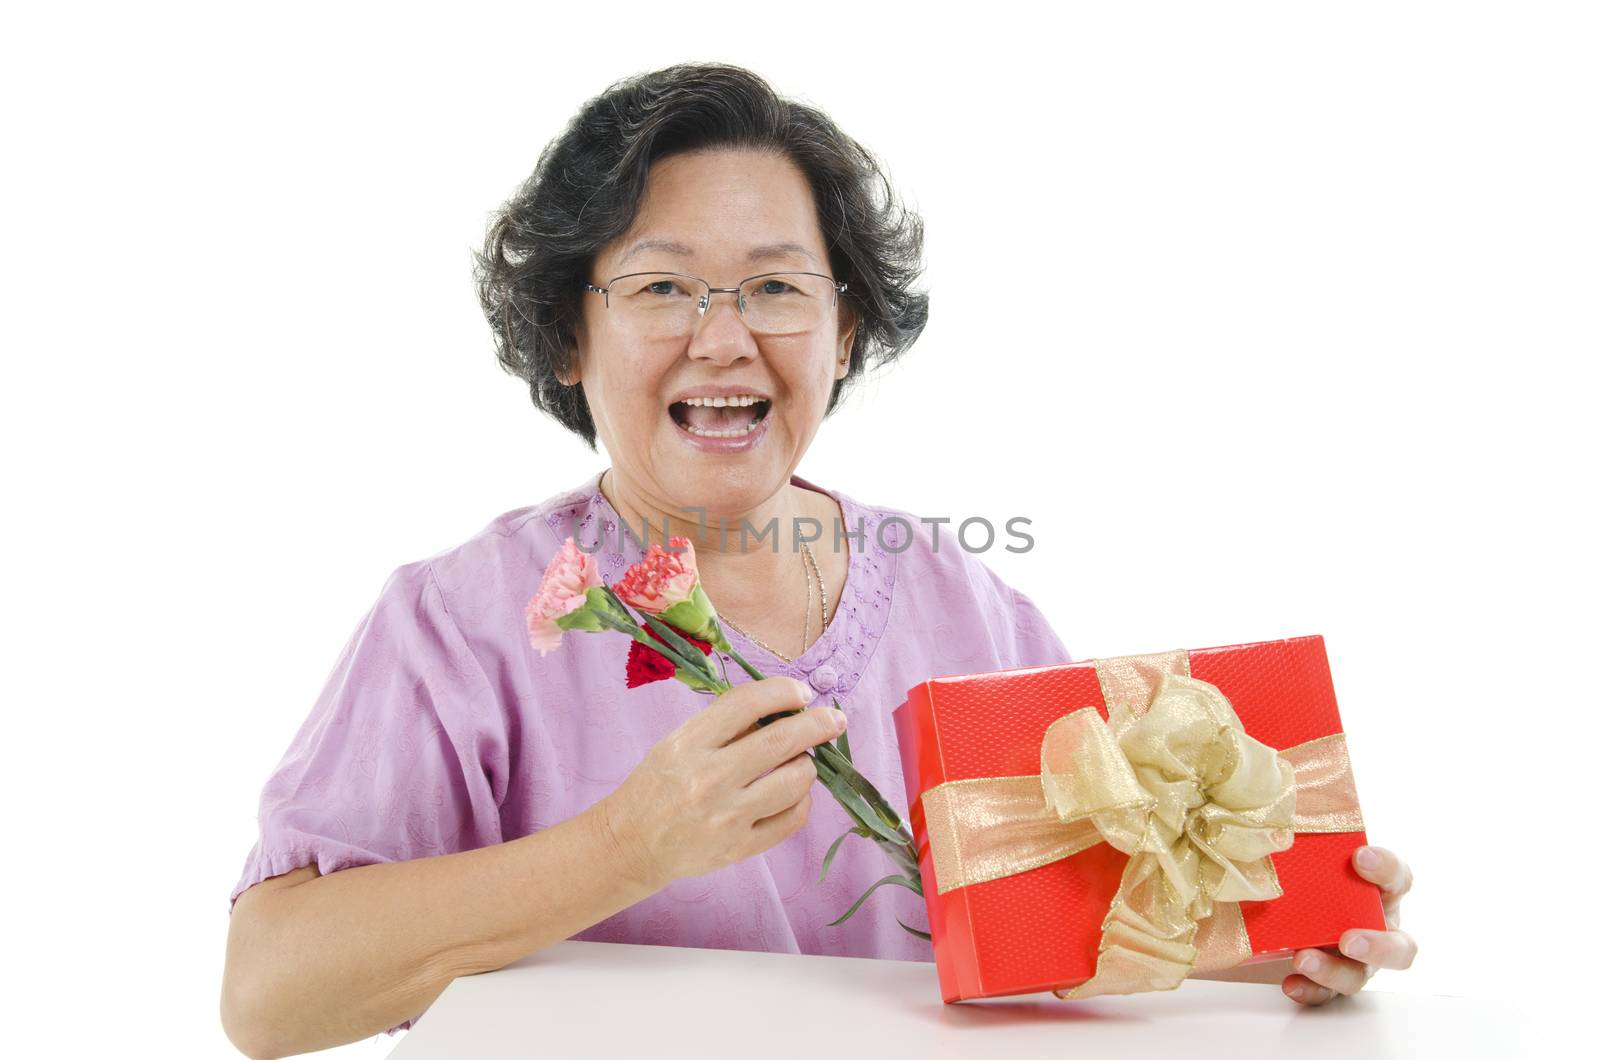 Portrait of happy 60s Asian senior adult woman receiving gift box and carnation flower on mothers day, isolated on white background.